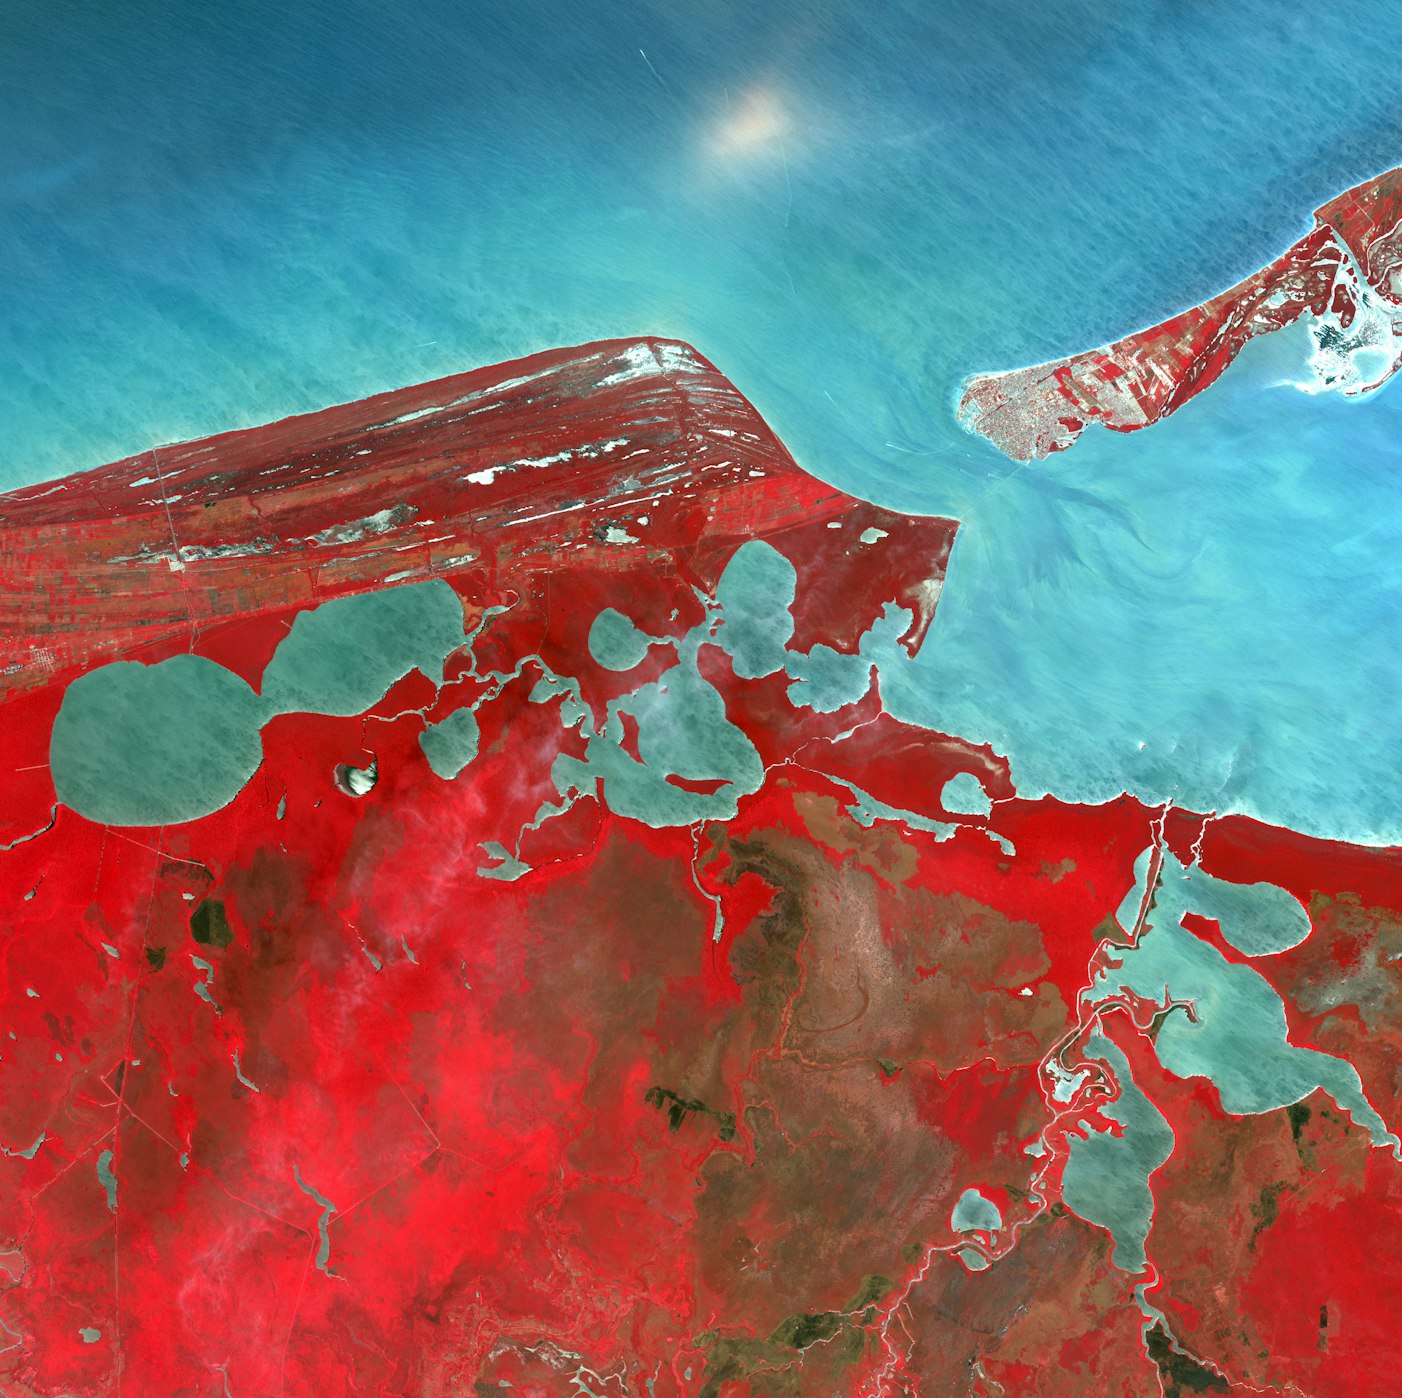 Red and blue aerial imagery of the western half of Mexico's Yucatan Peninsula